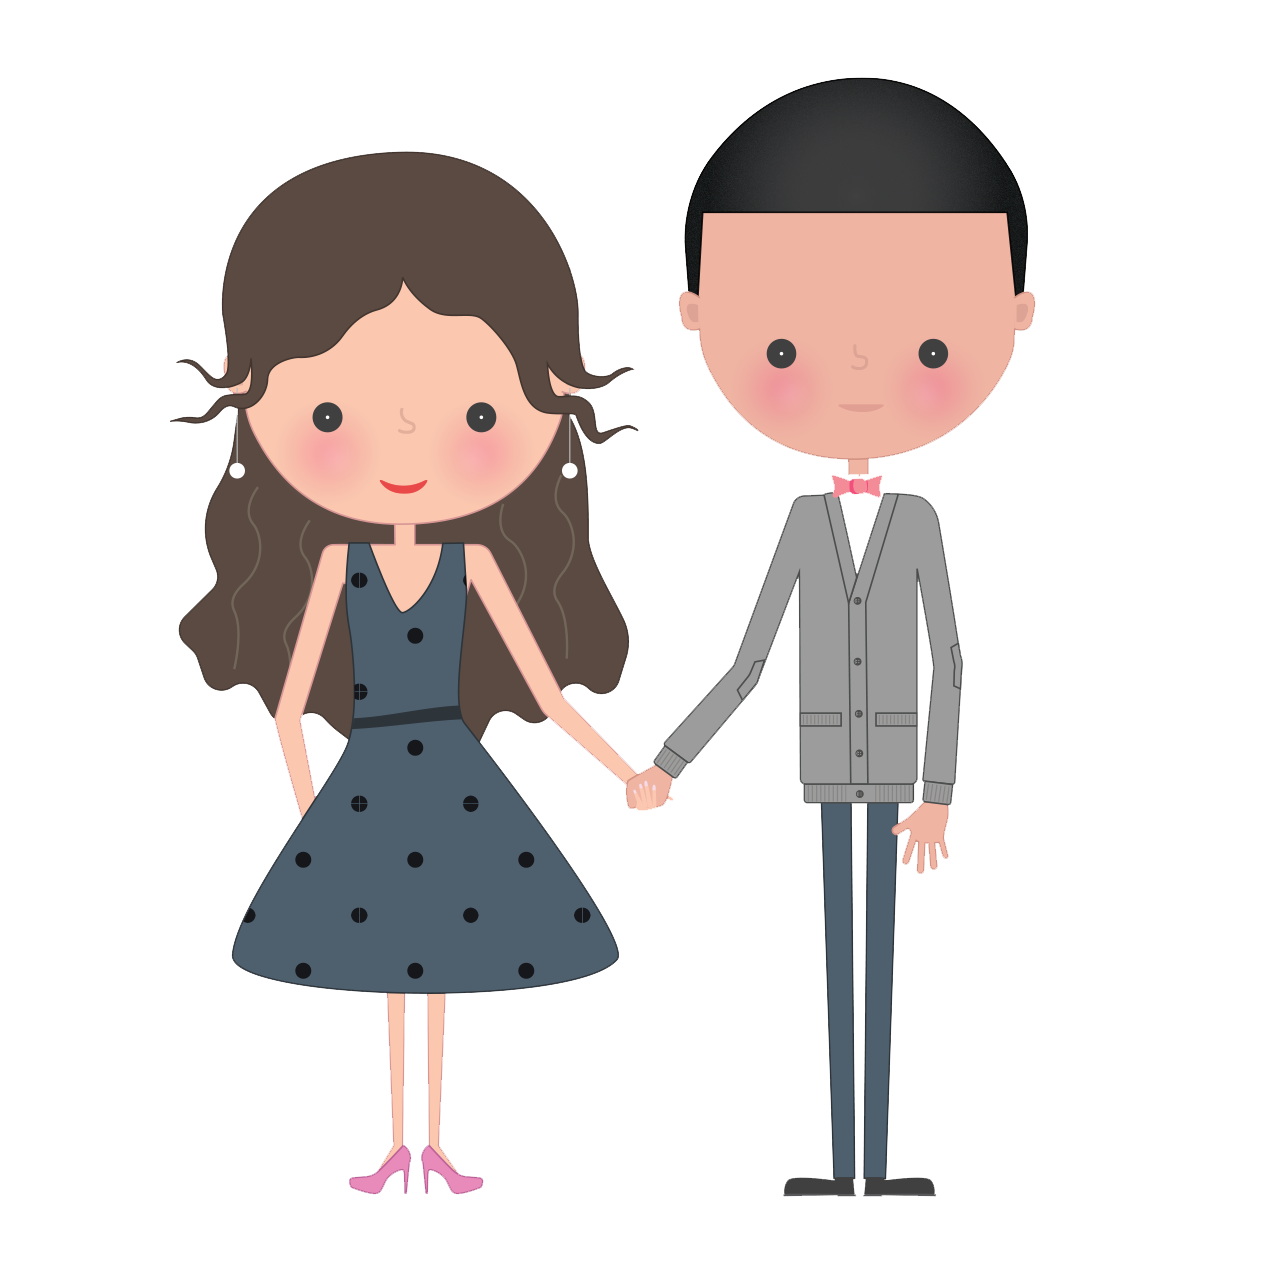 short clipart marriage love